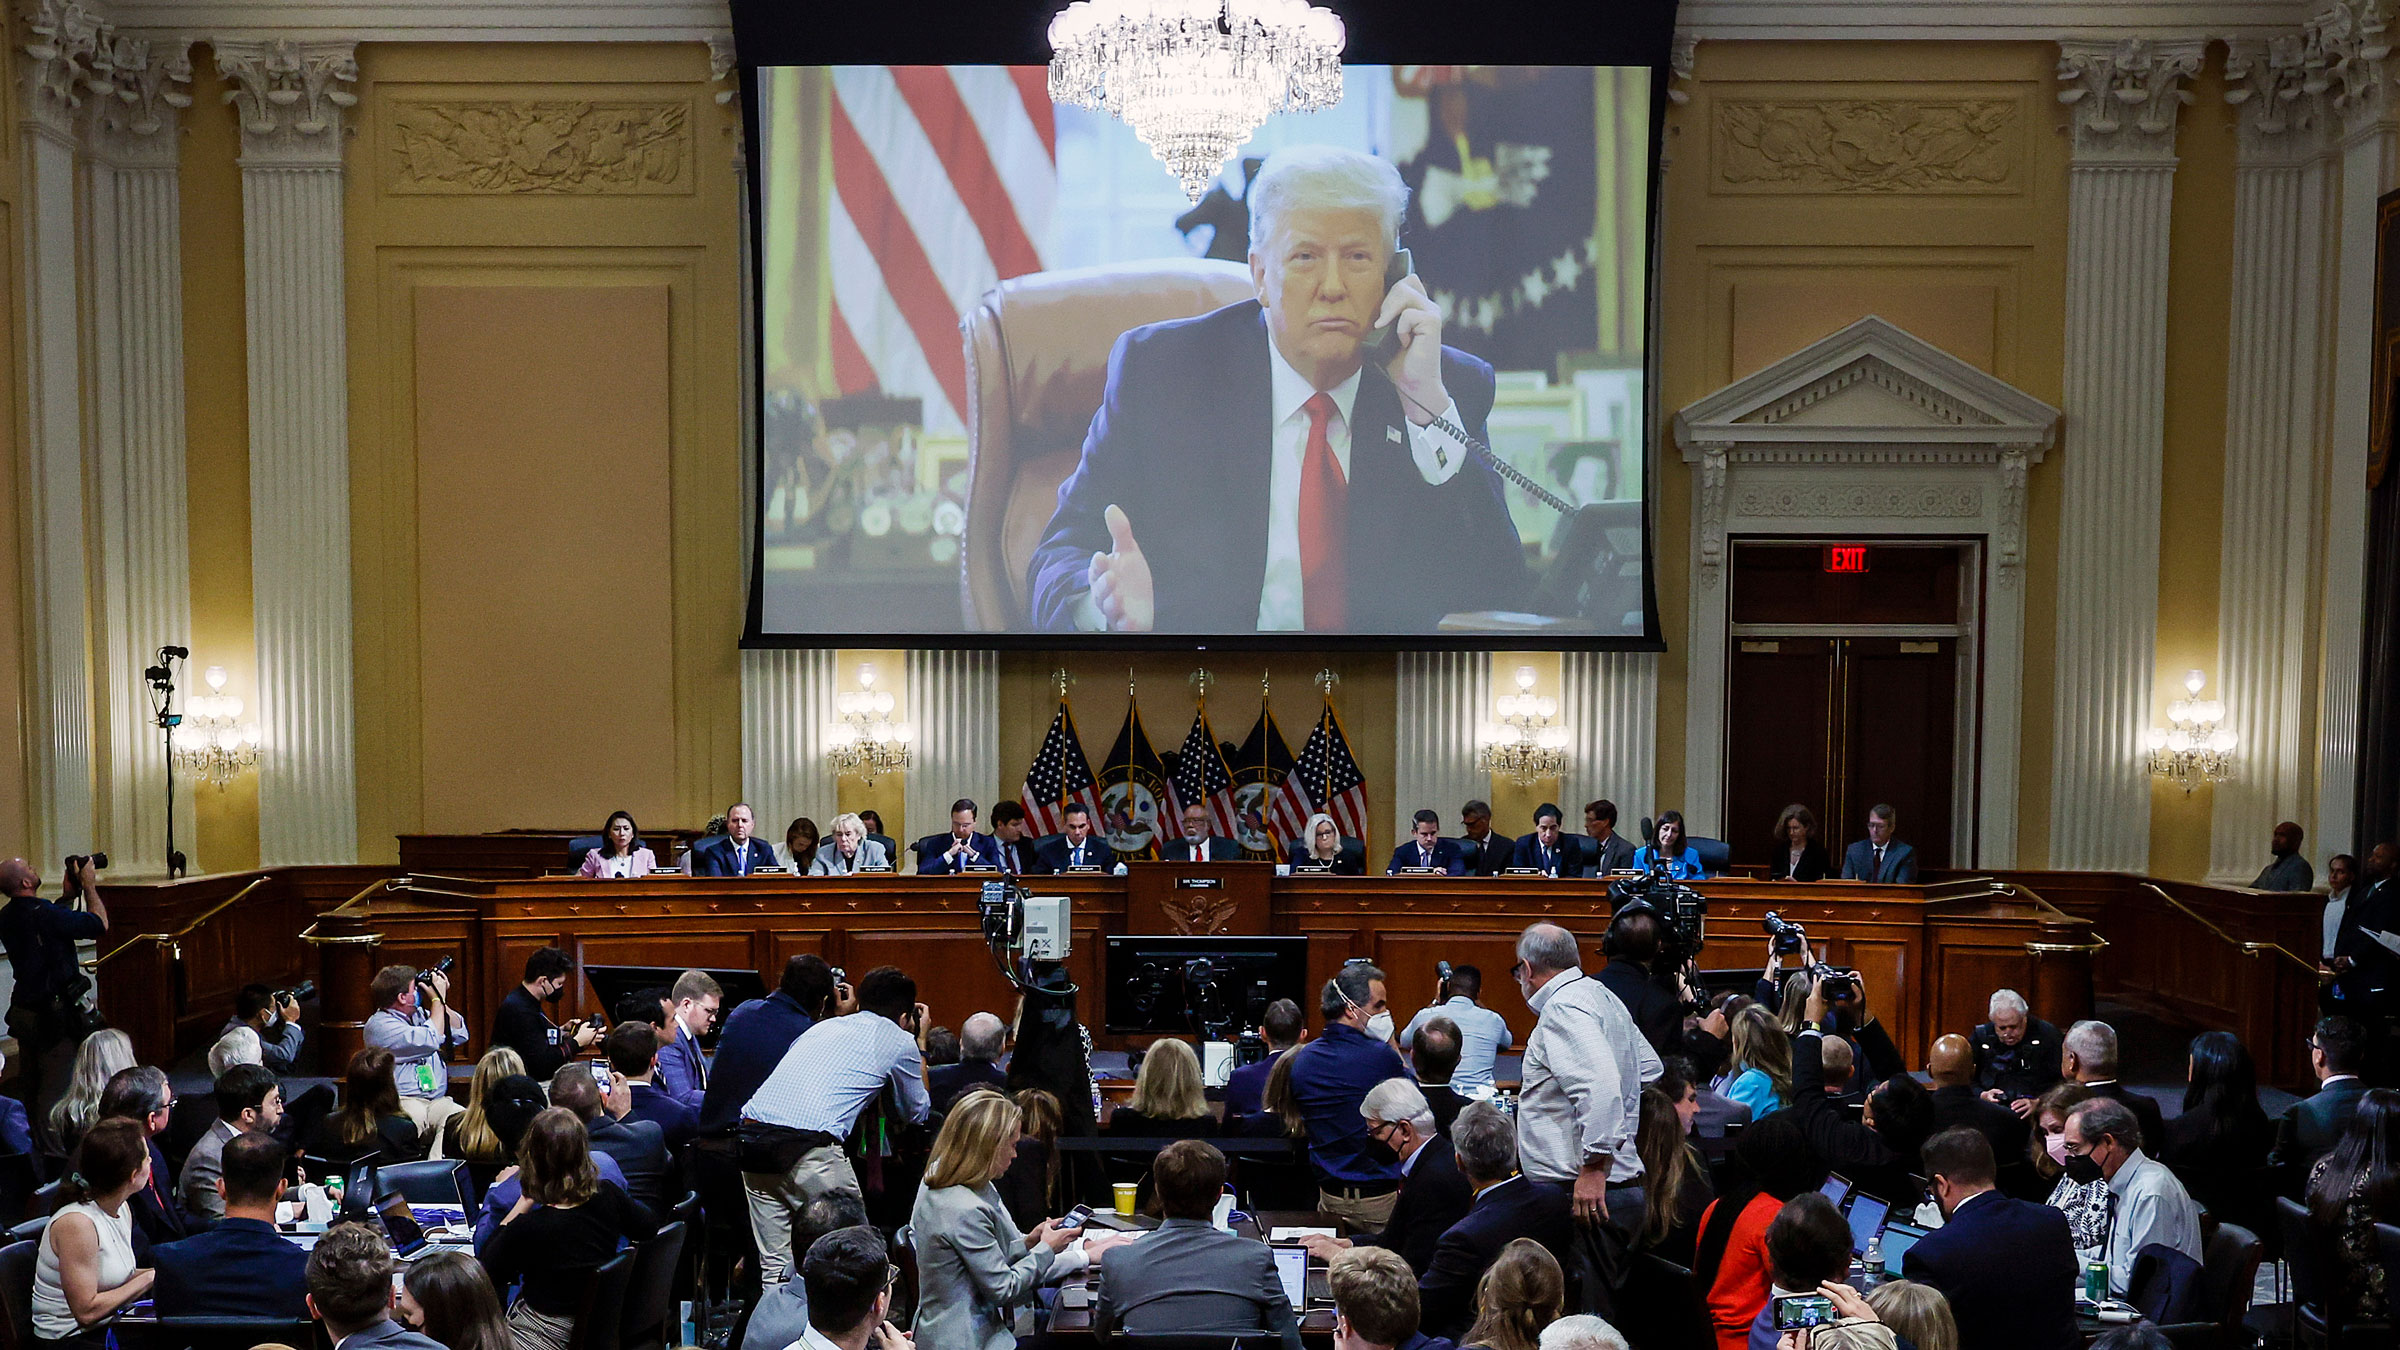 A photo of former President Donald Trump on the phone is displayed during Thursday's hearing.